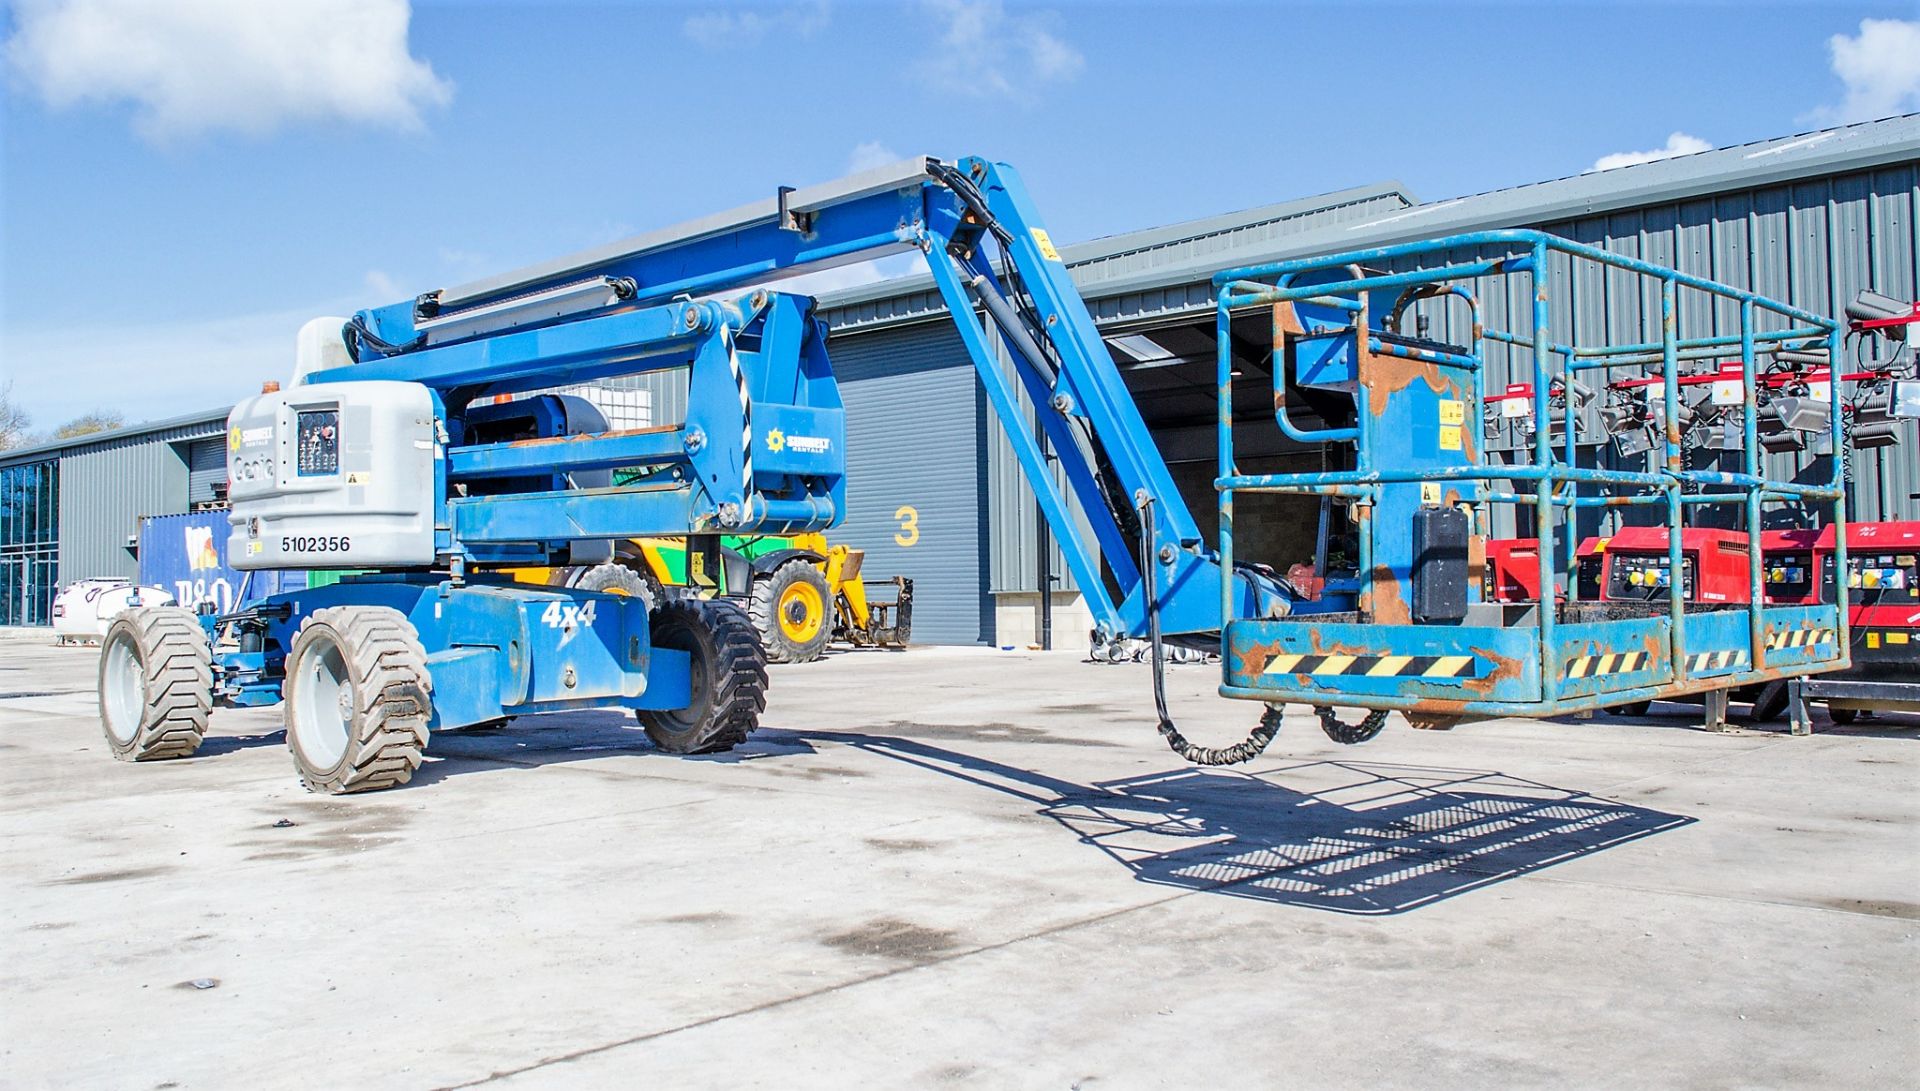 Genie Z60/34 diesel/electric articulated boom lift access platform Year: 2014 S/N: Z6014-13483 - Image 2 of 17